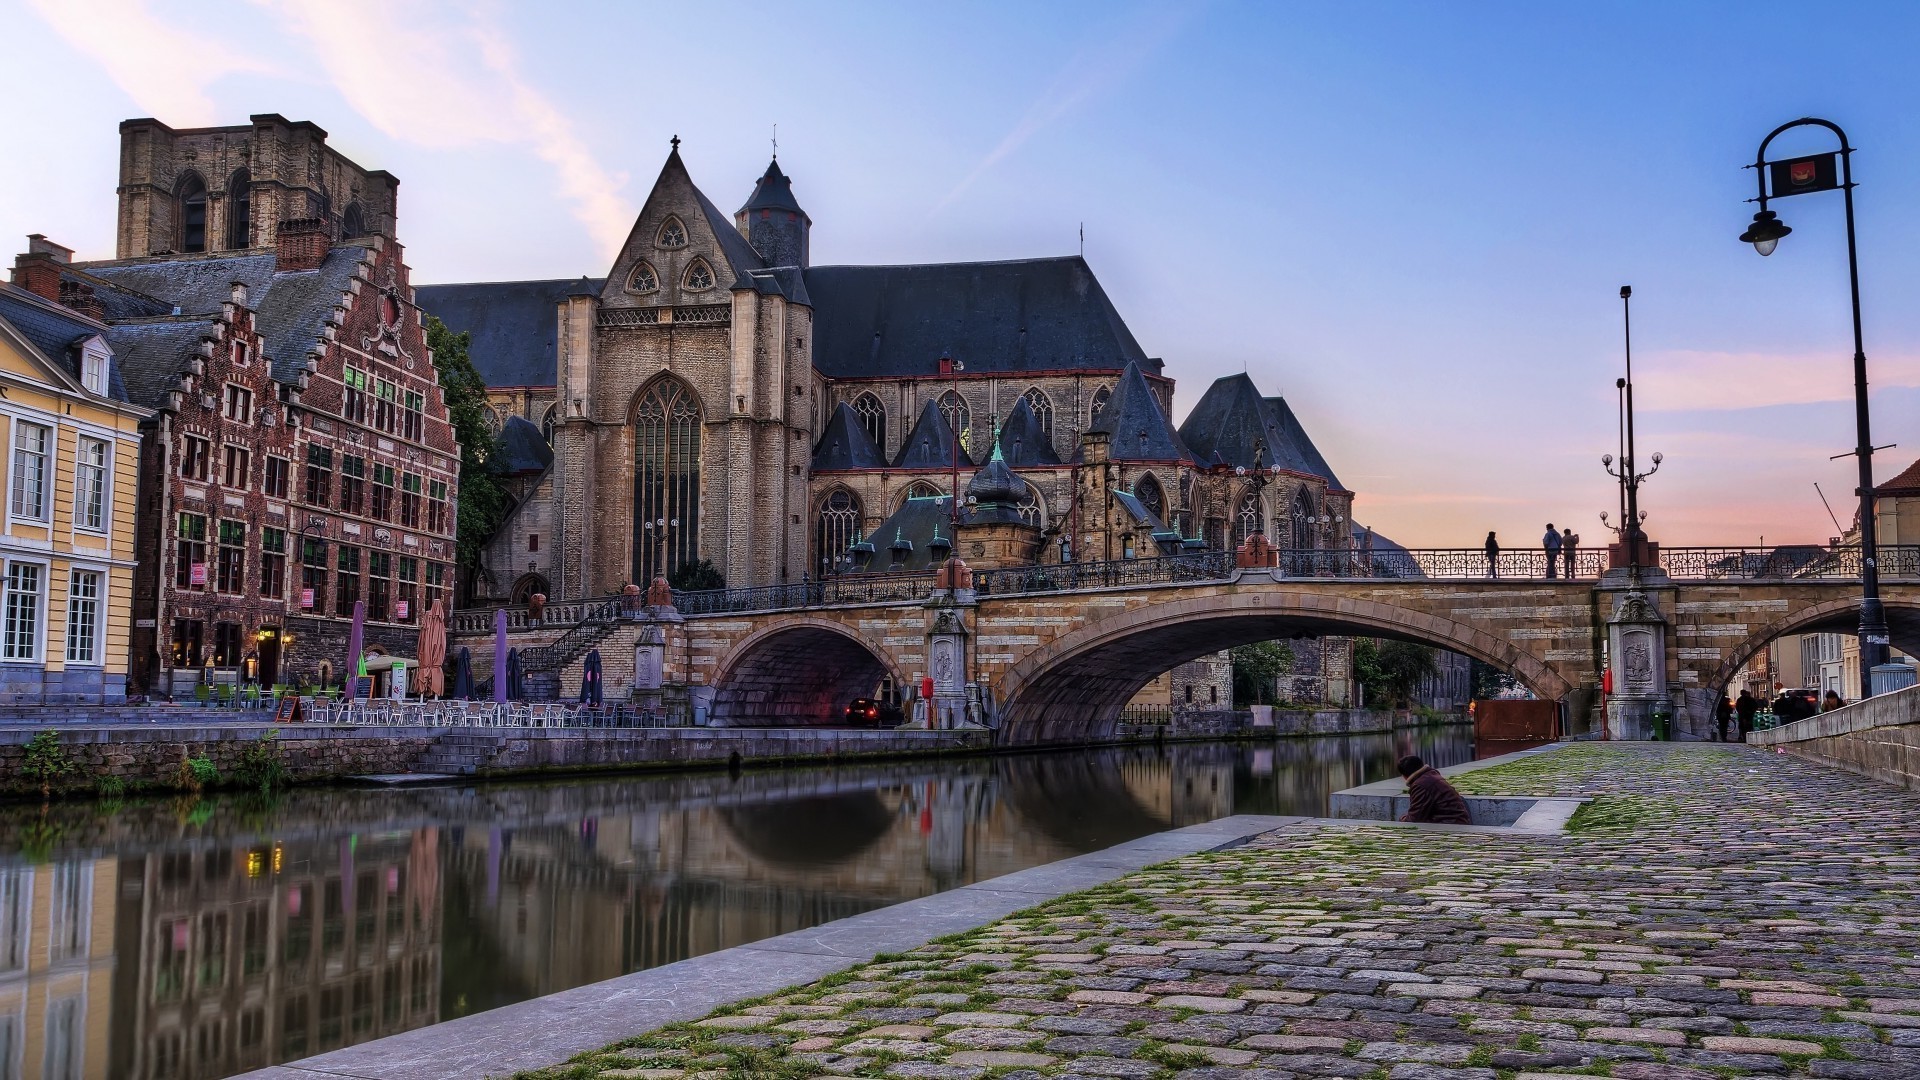 city and architecture architecture travel building river bridge city old church tourism water sky gothic religion castle house outdoors town ancient